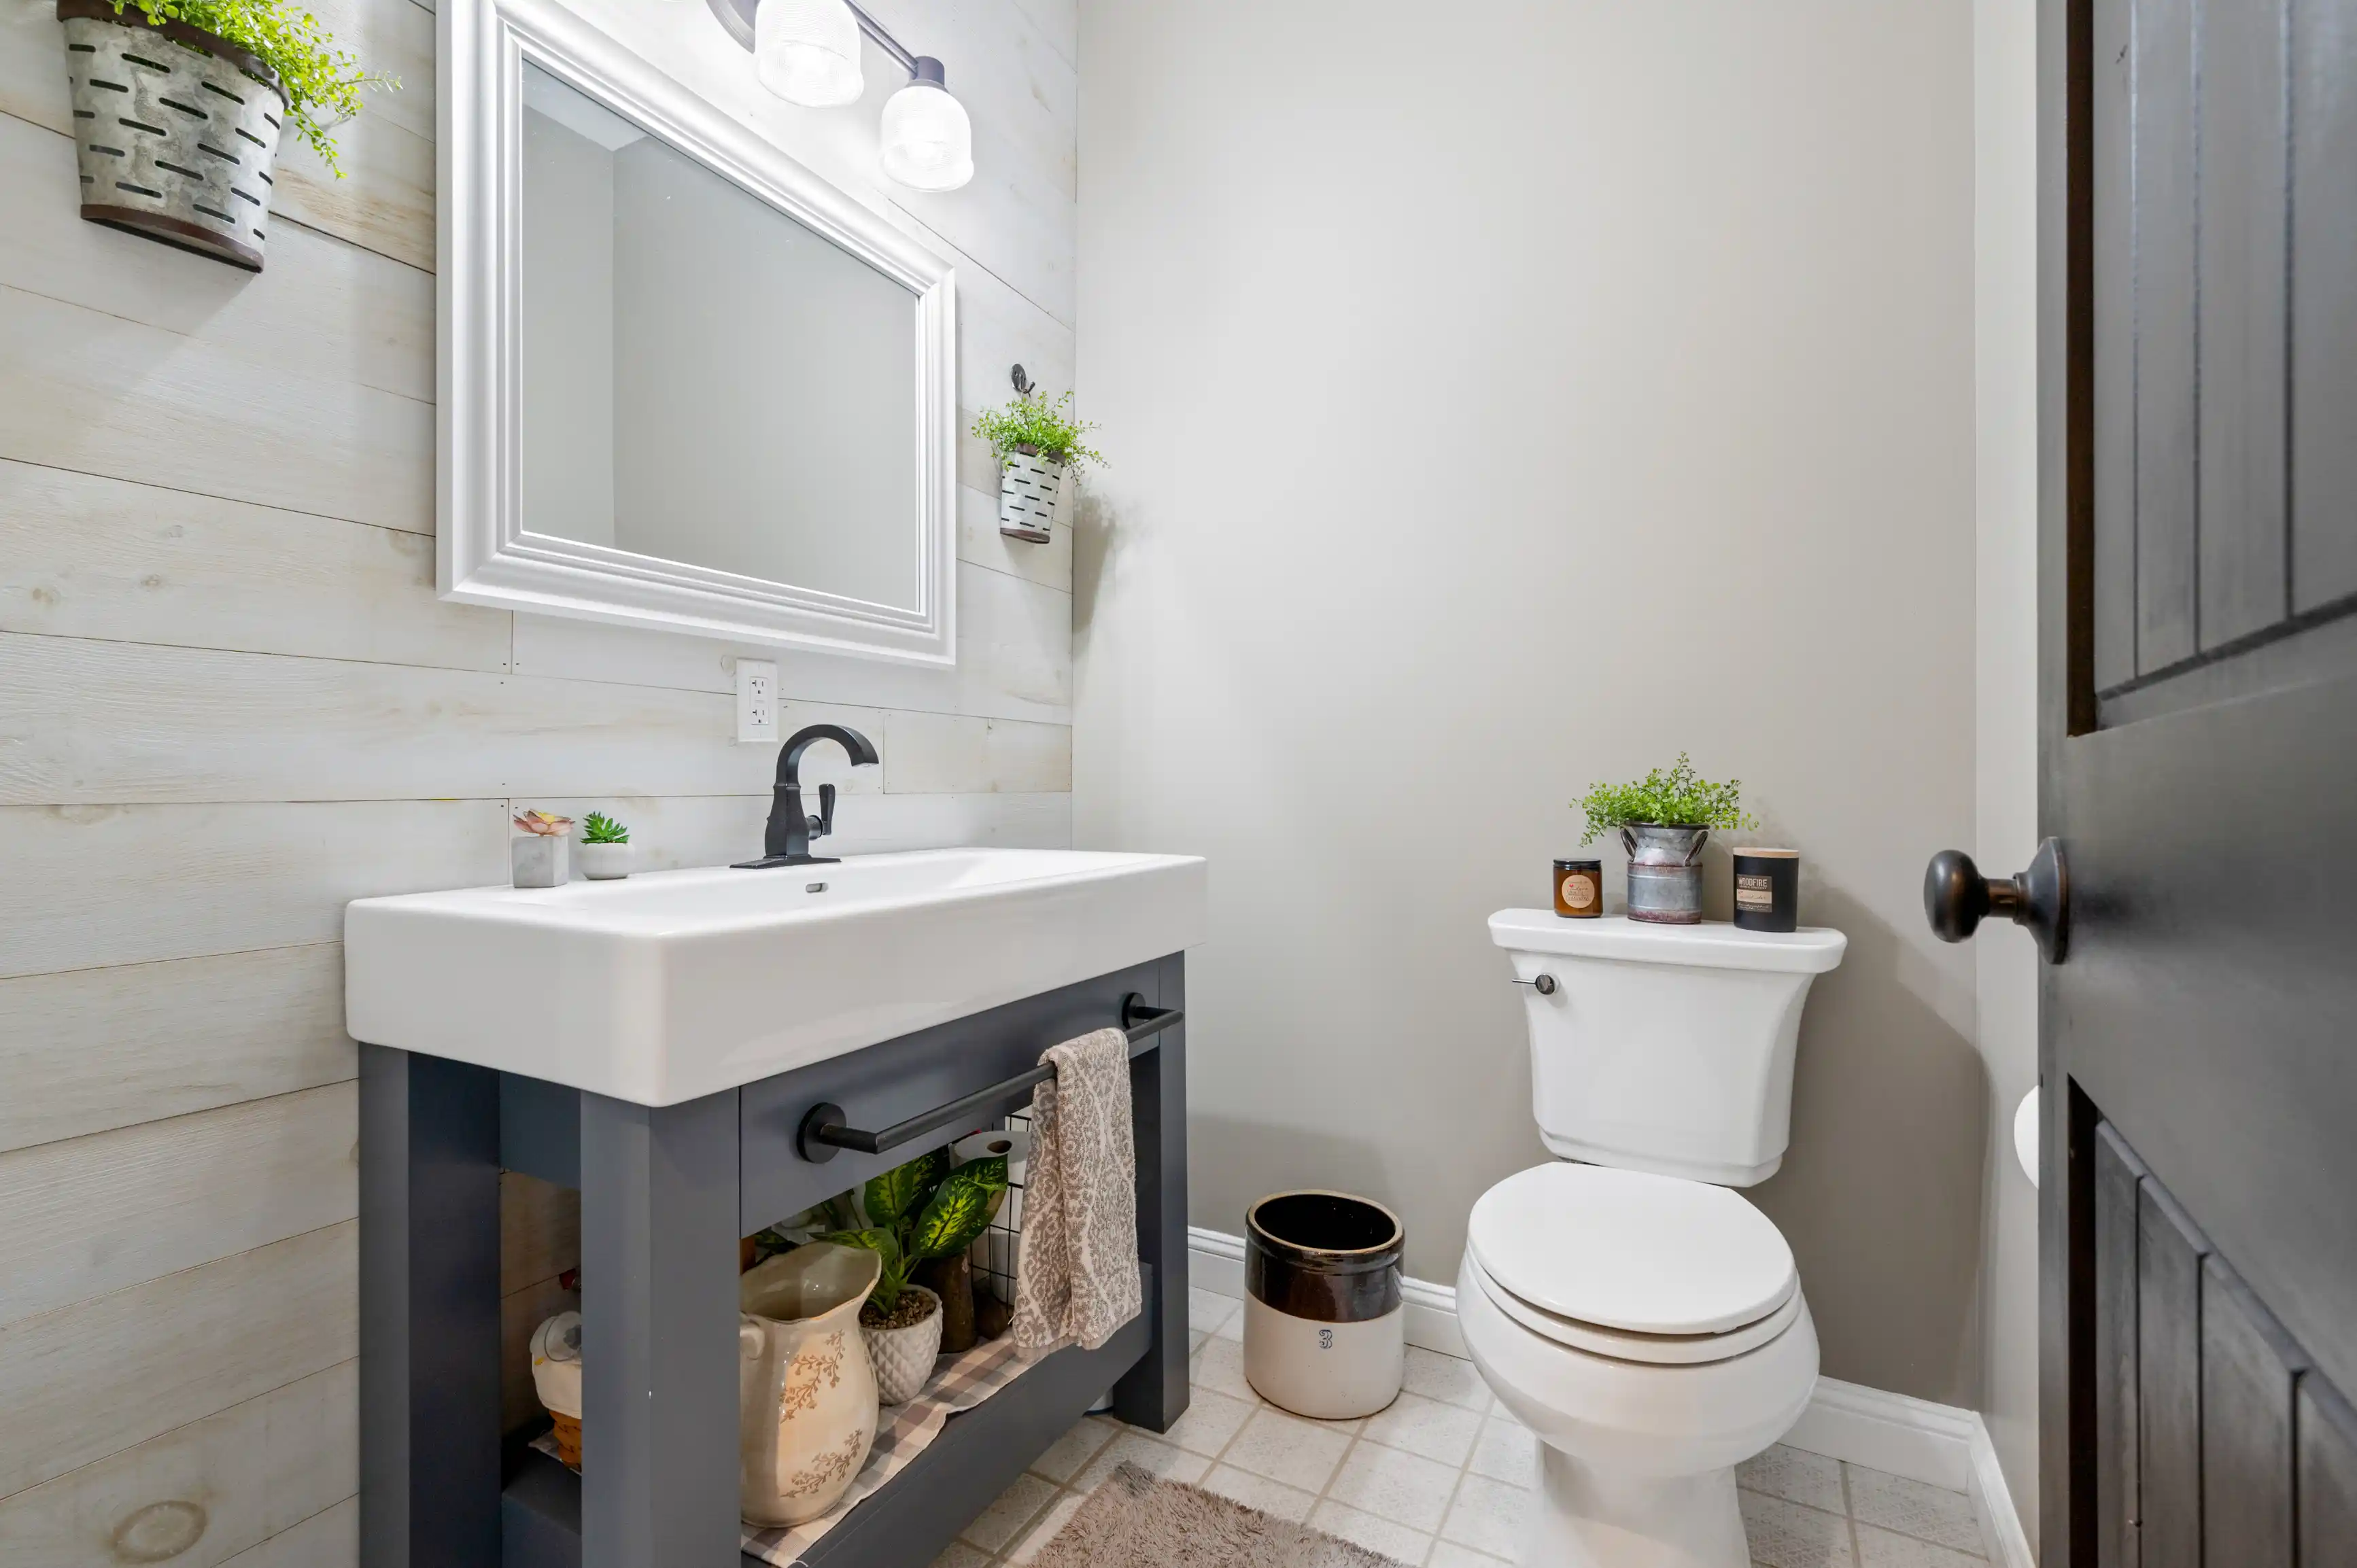 Modern bathroom interior with white shiplap walls, vanity cabinet with sink, mirror, toilet, and decorative plants.